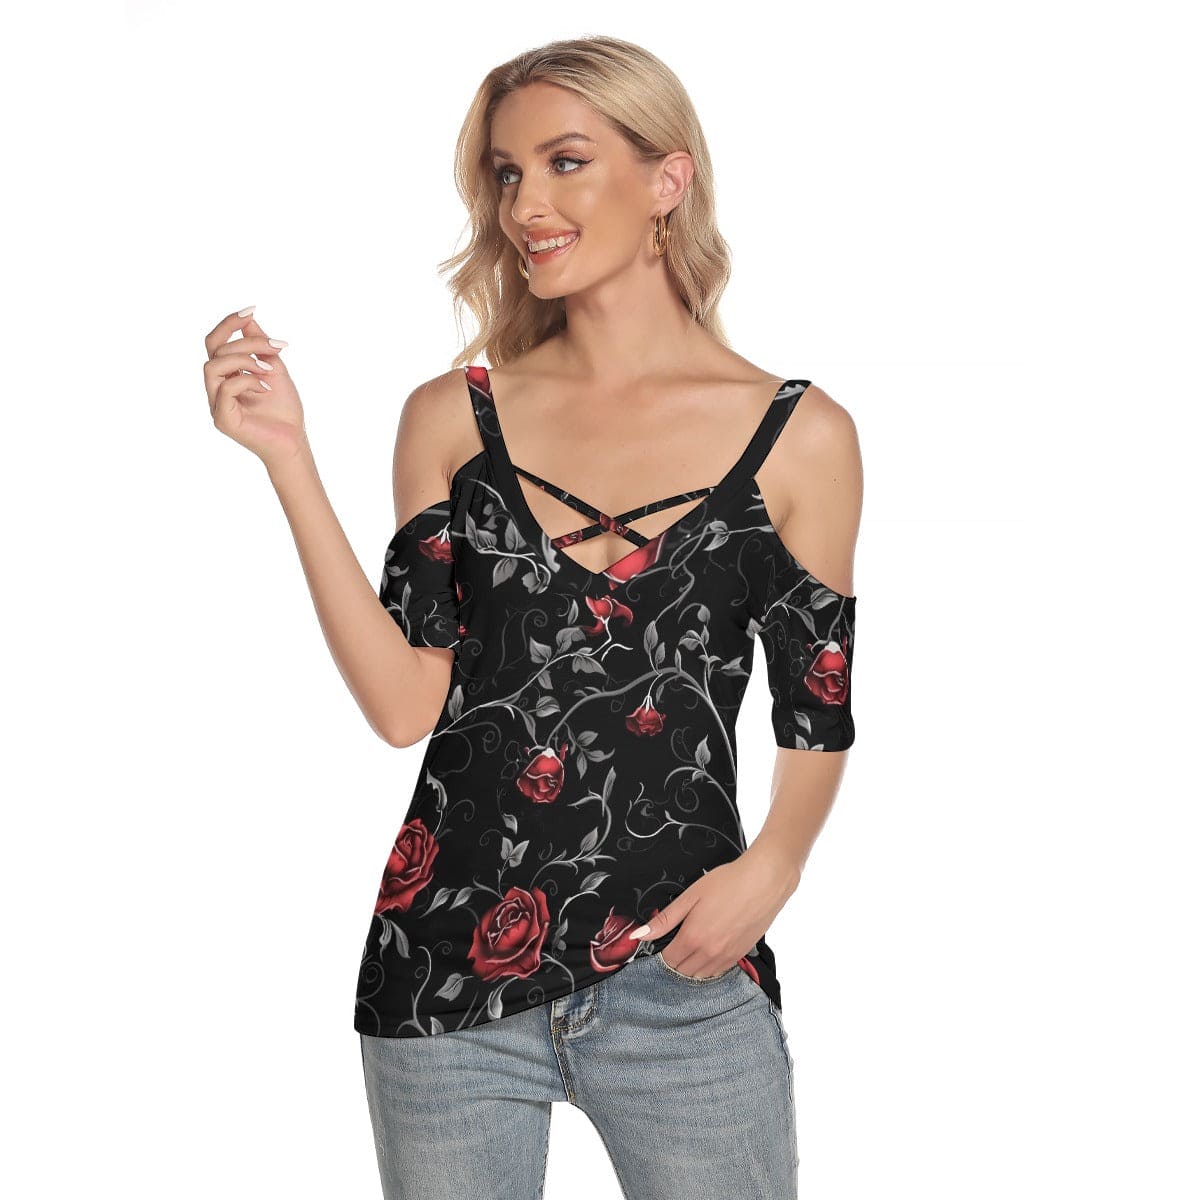 Women's Gothic Black Red Roses Cold Shoulder T-shirt With Criss Cross Strips